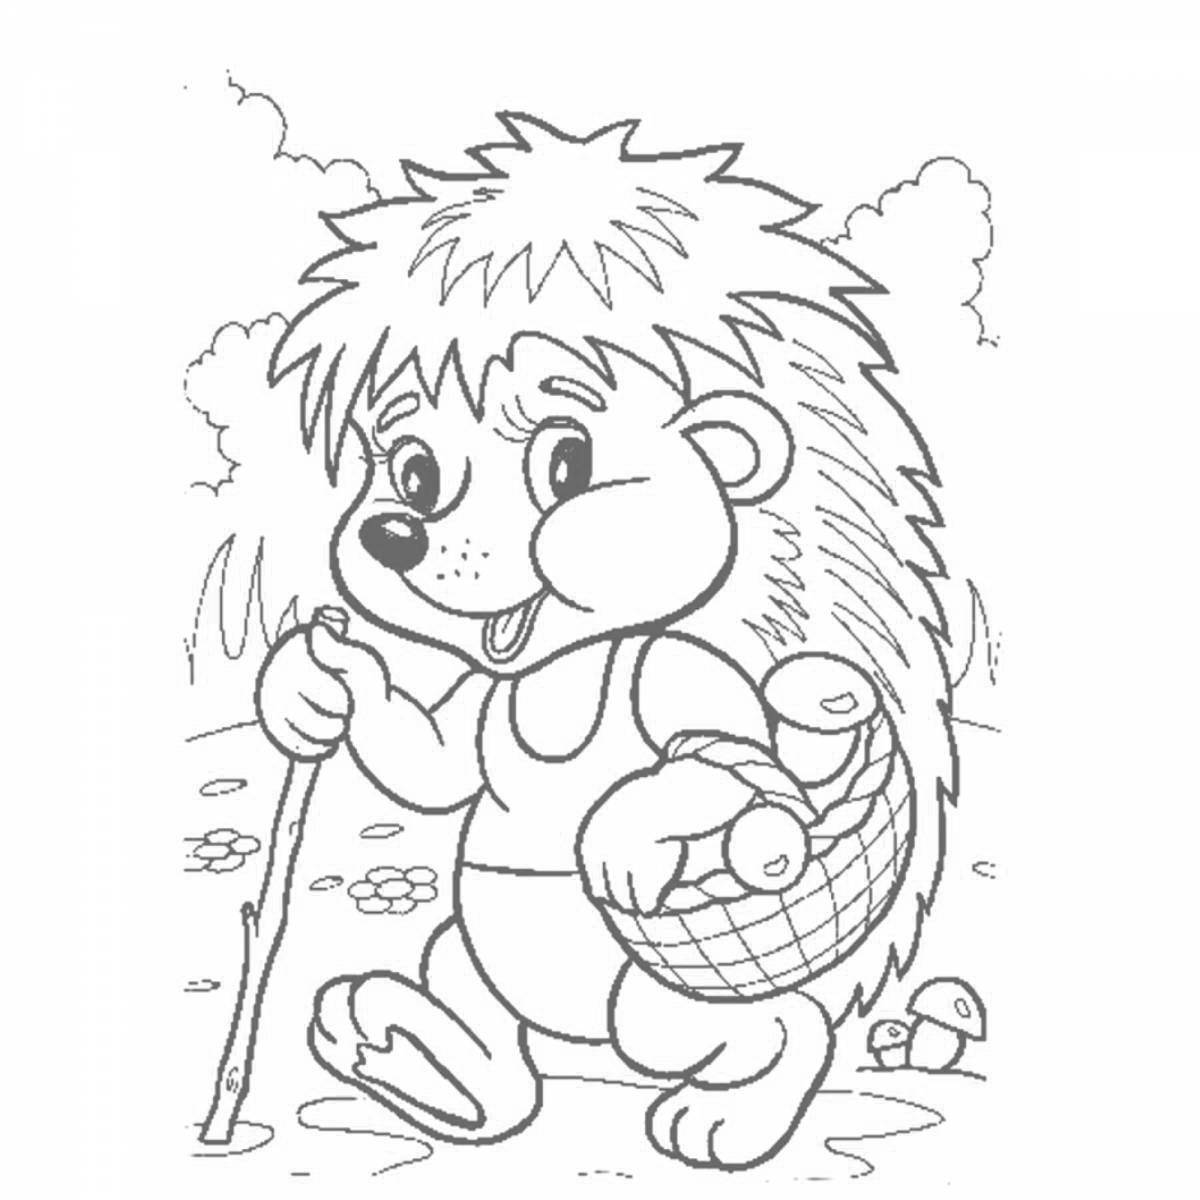 Suteev's Refined Rescuer coloring page